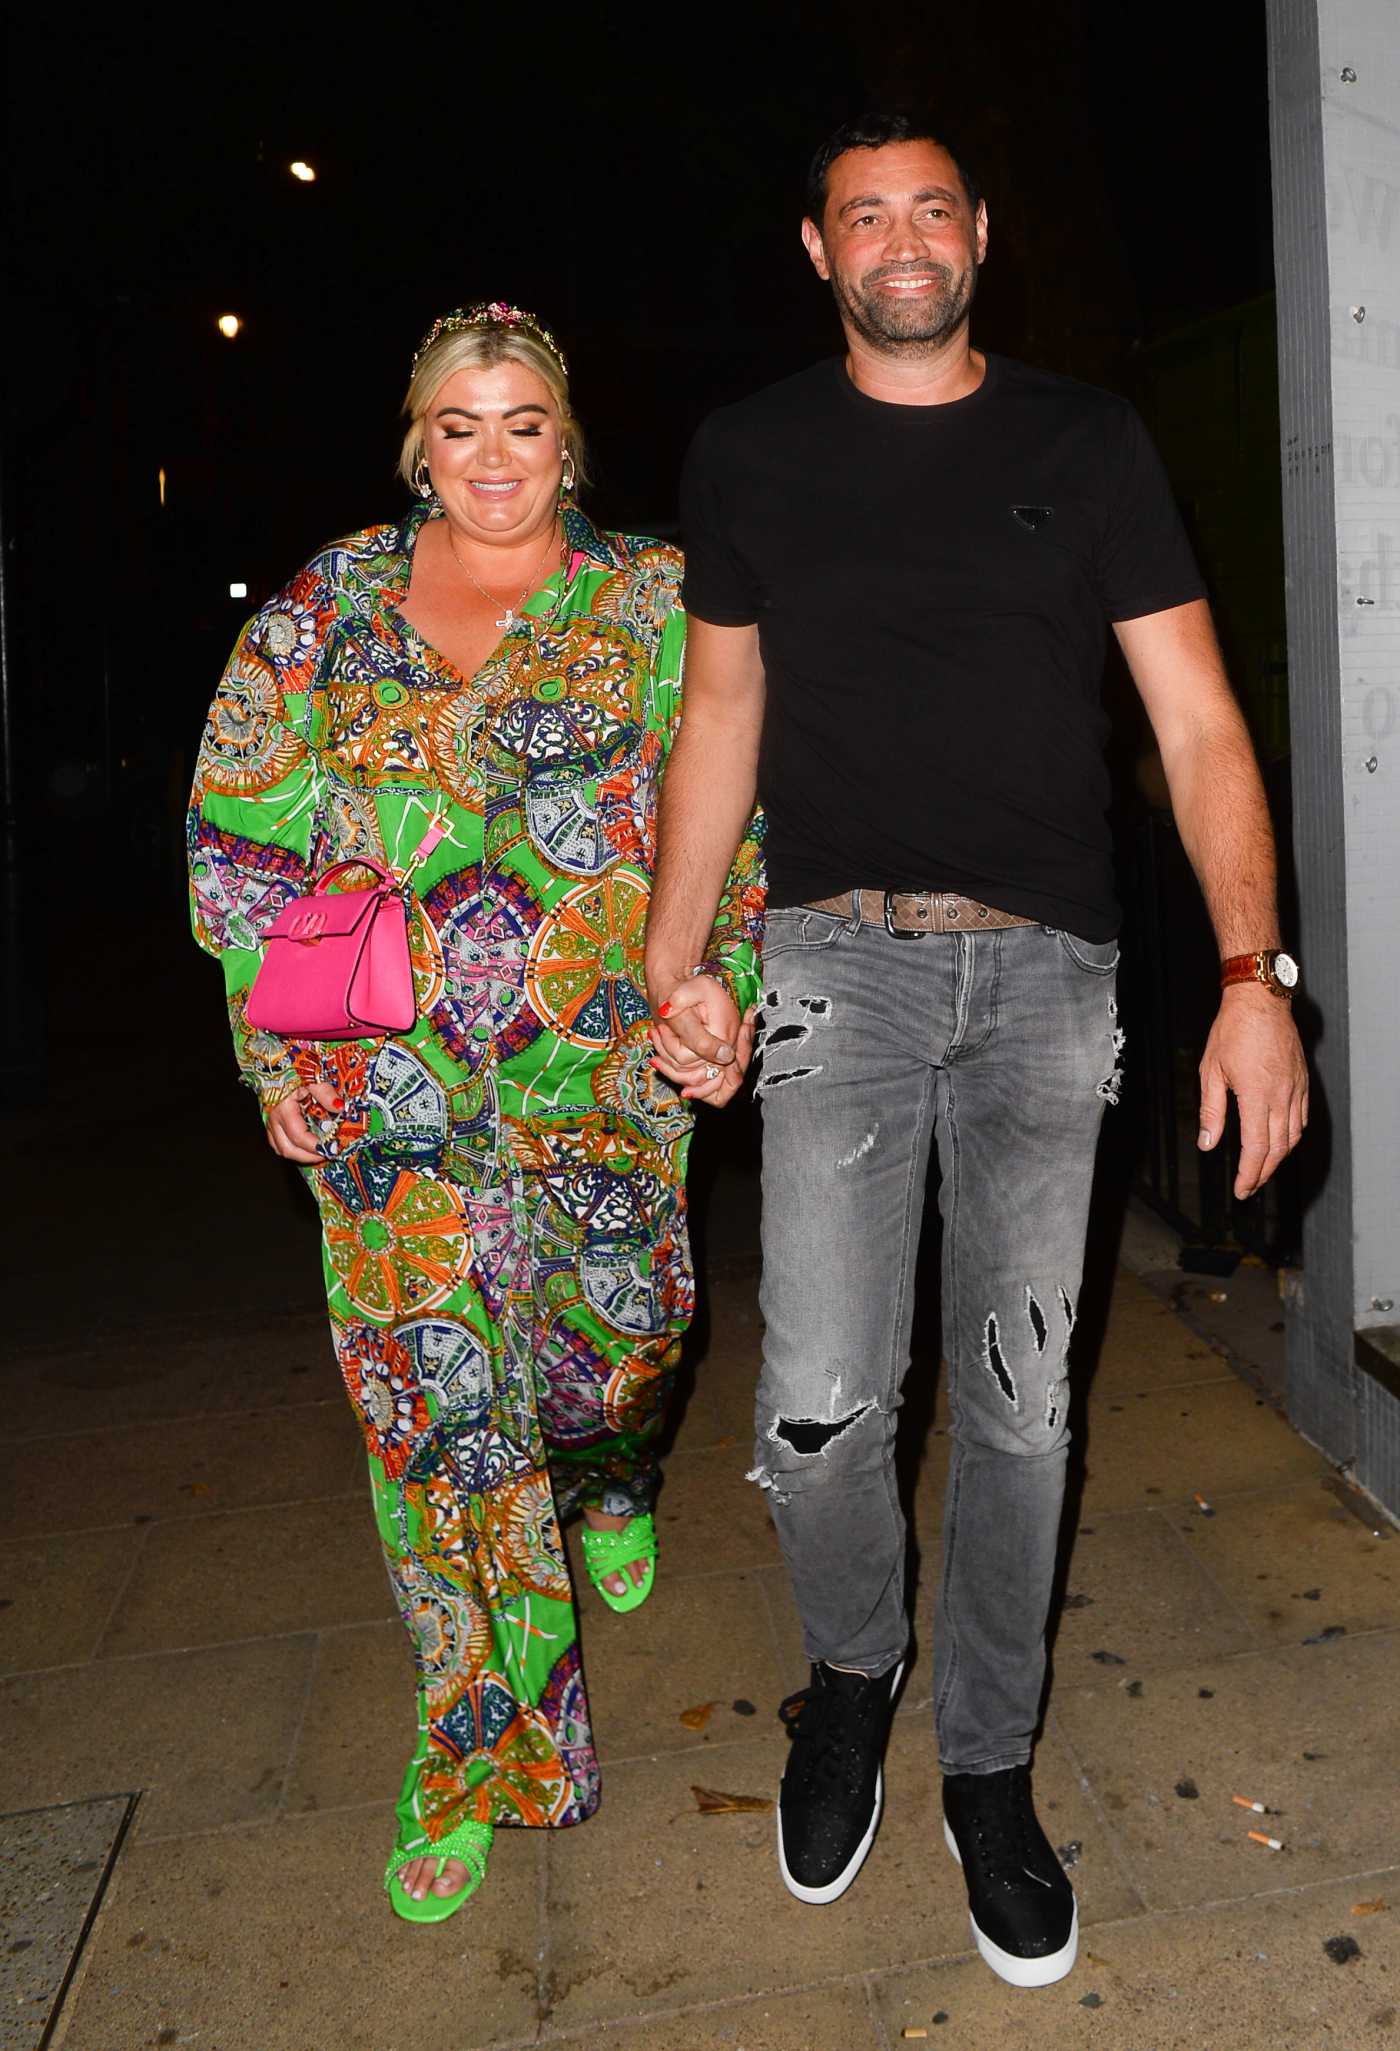 Gemma Collins in a Patterned Green Suit Arrives with Her Fiance Rami at Novikov Mayfair in London 08/21/2021